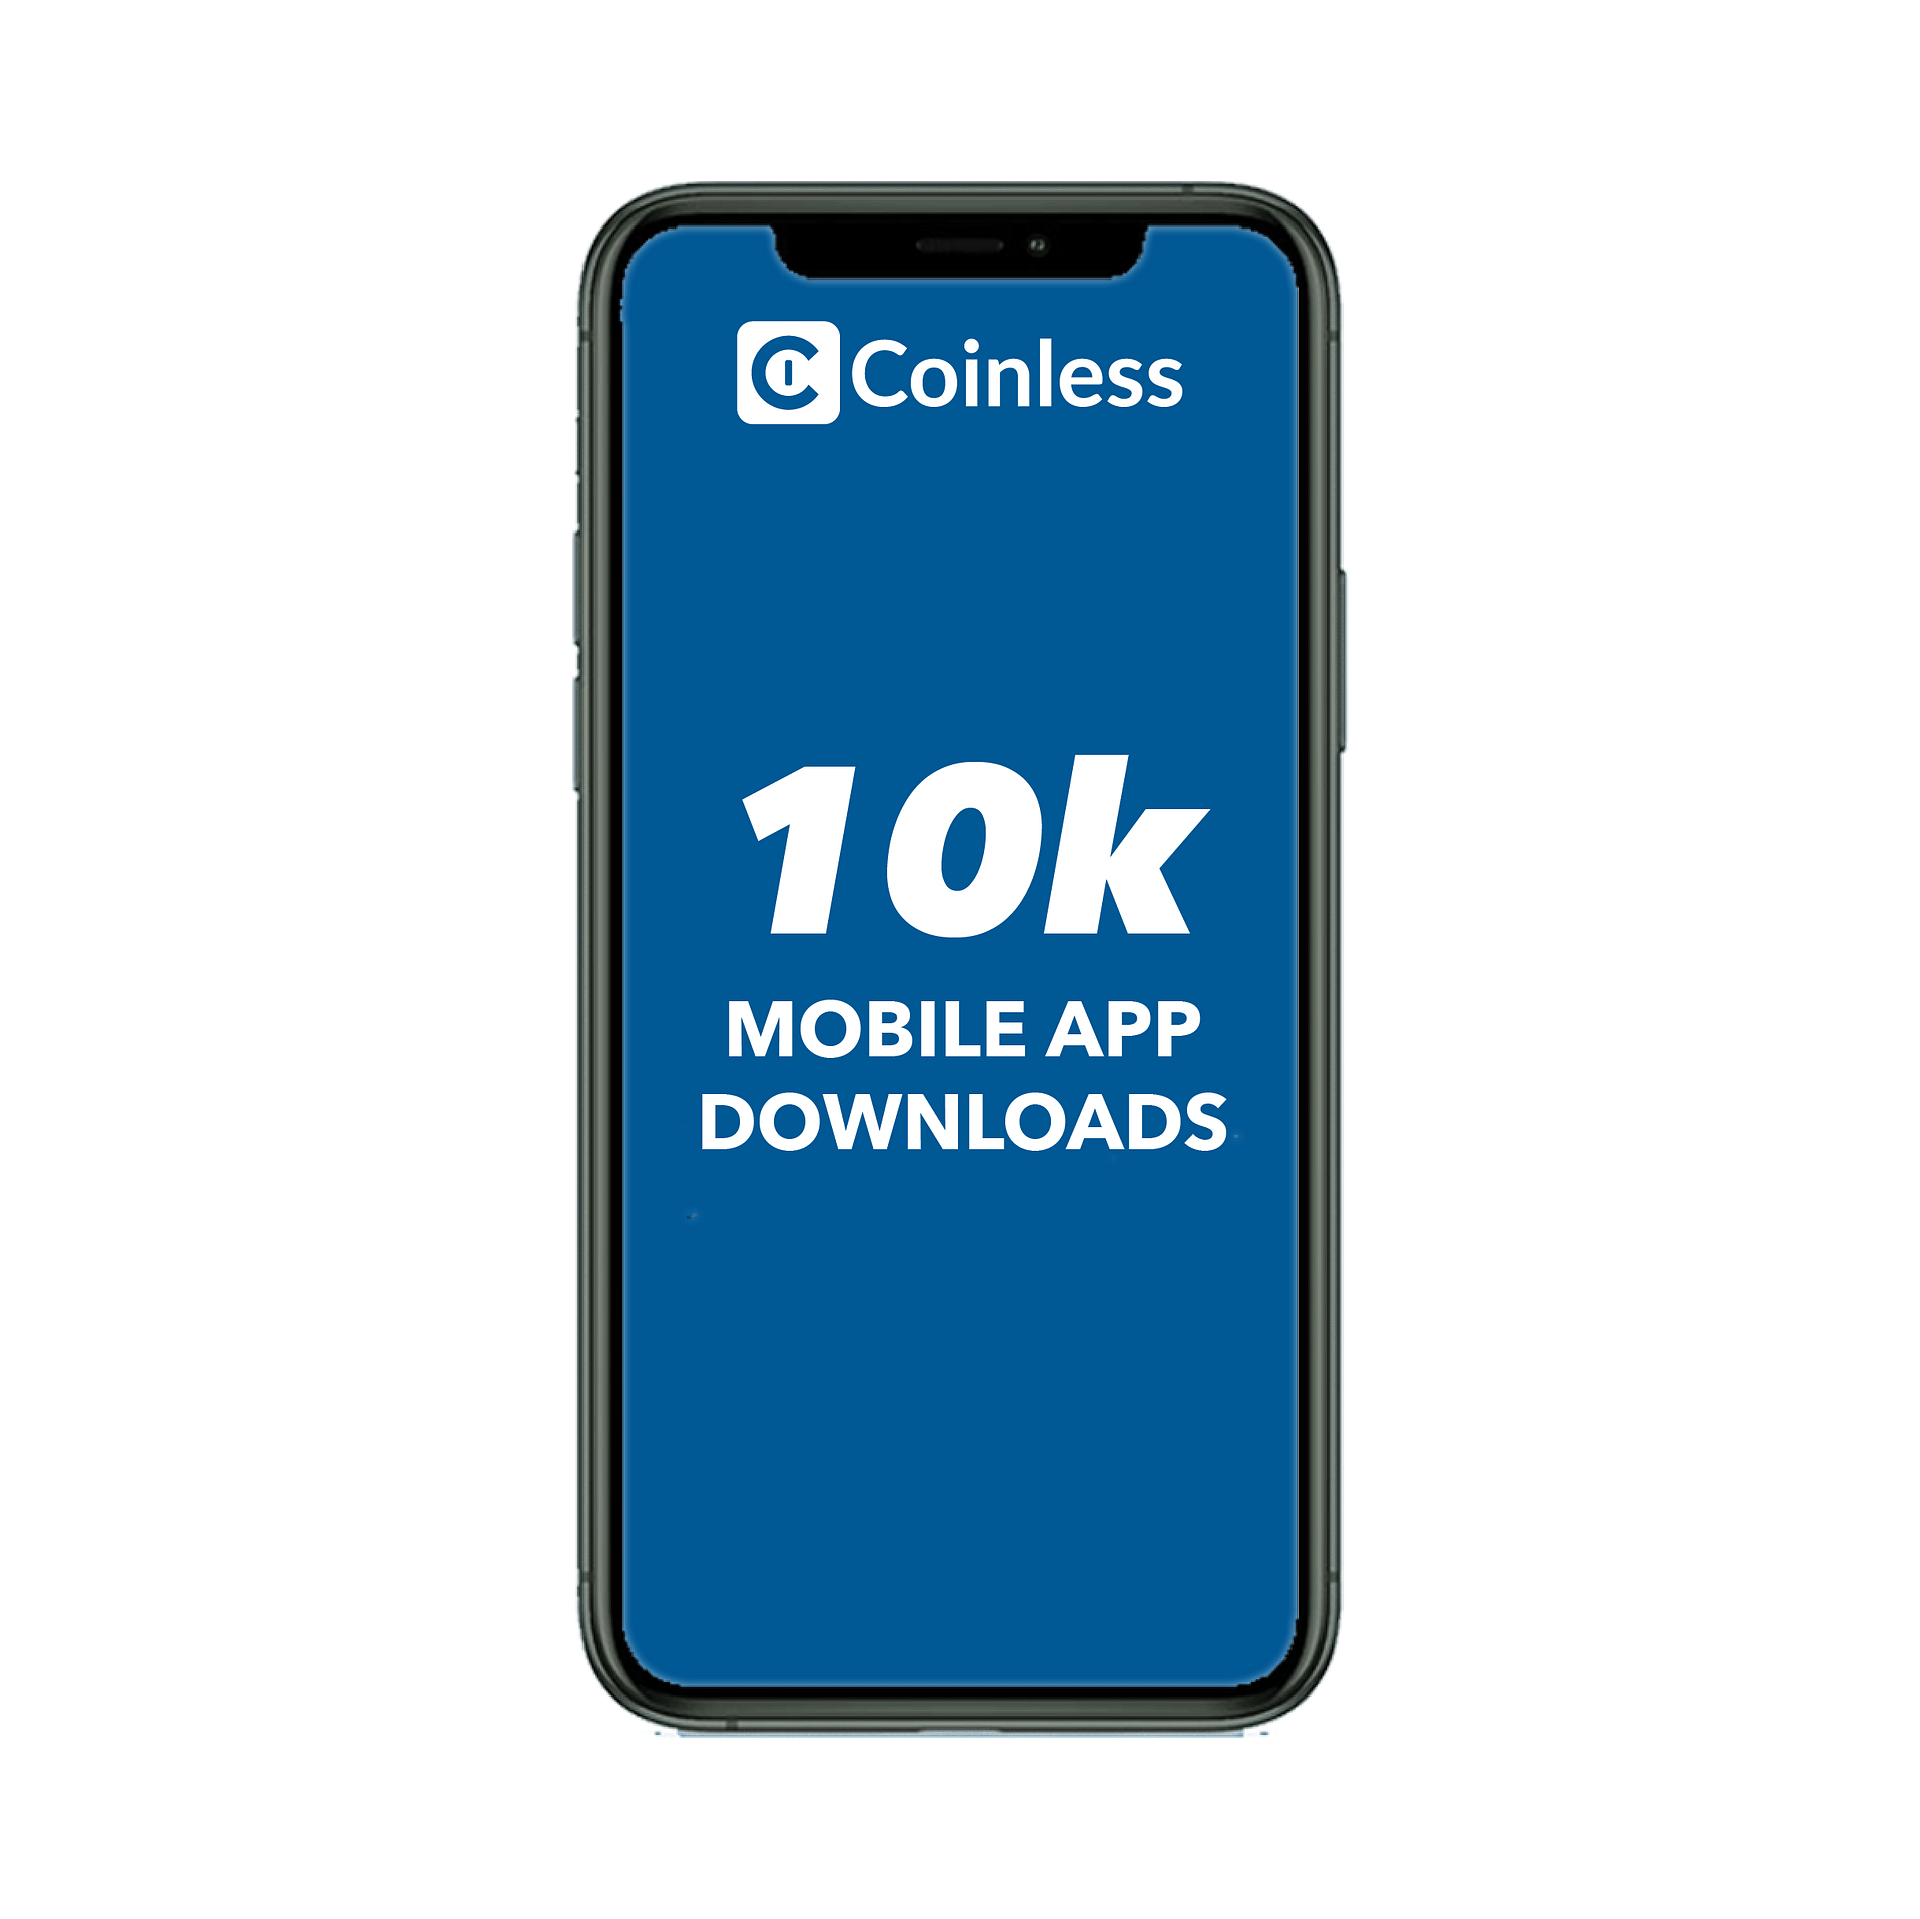 Coinless Hits a New Customer Milestone with 10,000 App Downloads